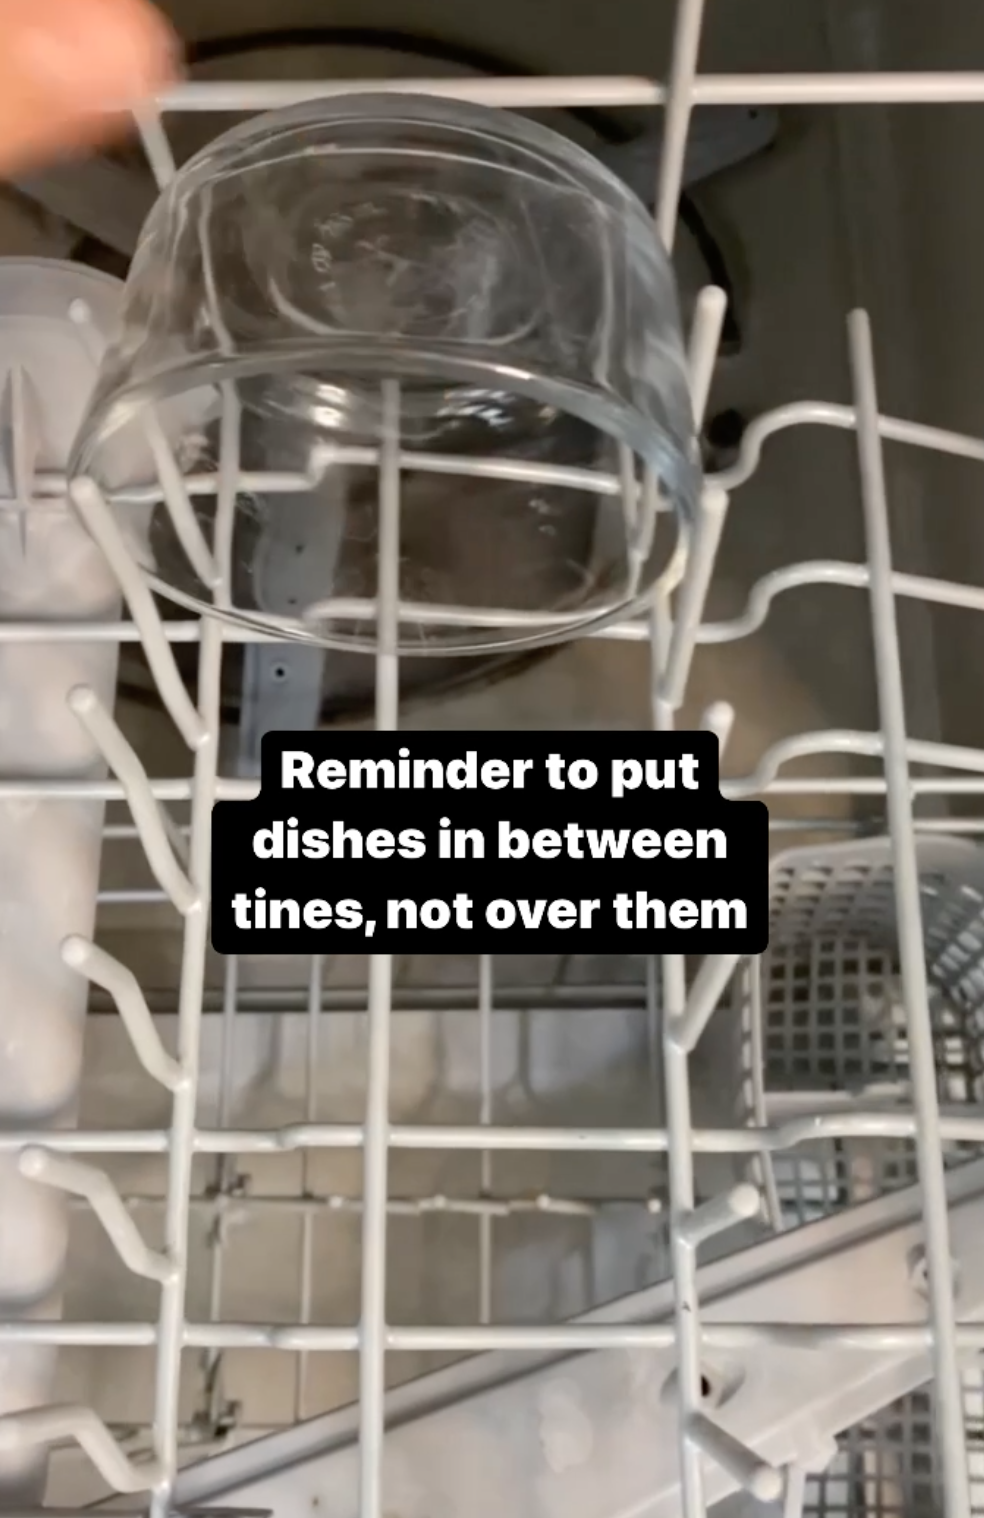 Reminder to put dishes in between tines, not over them